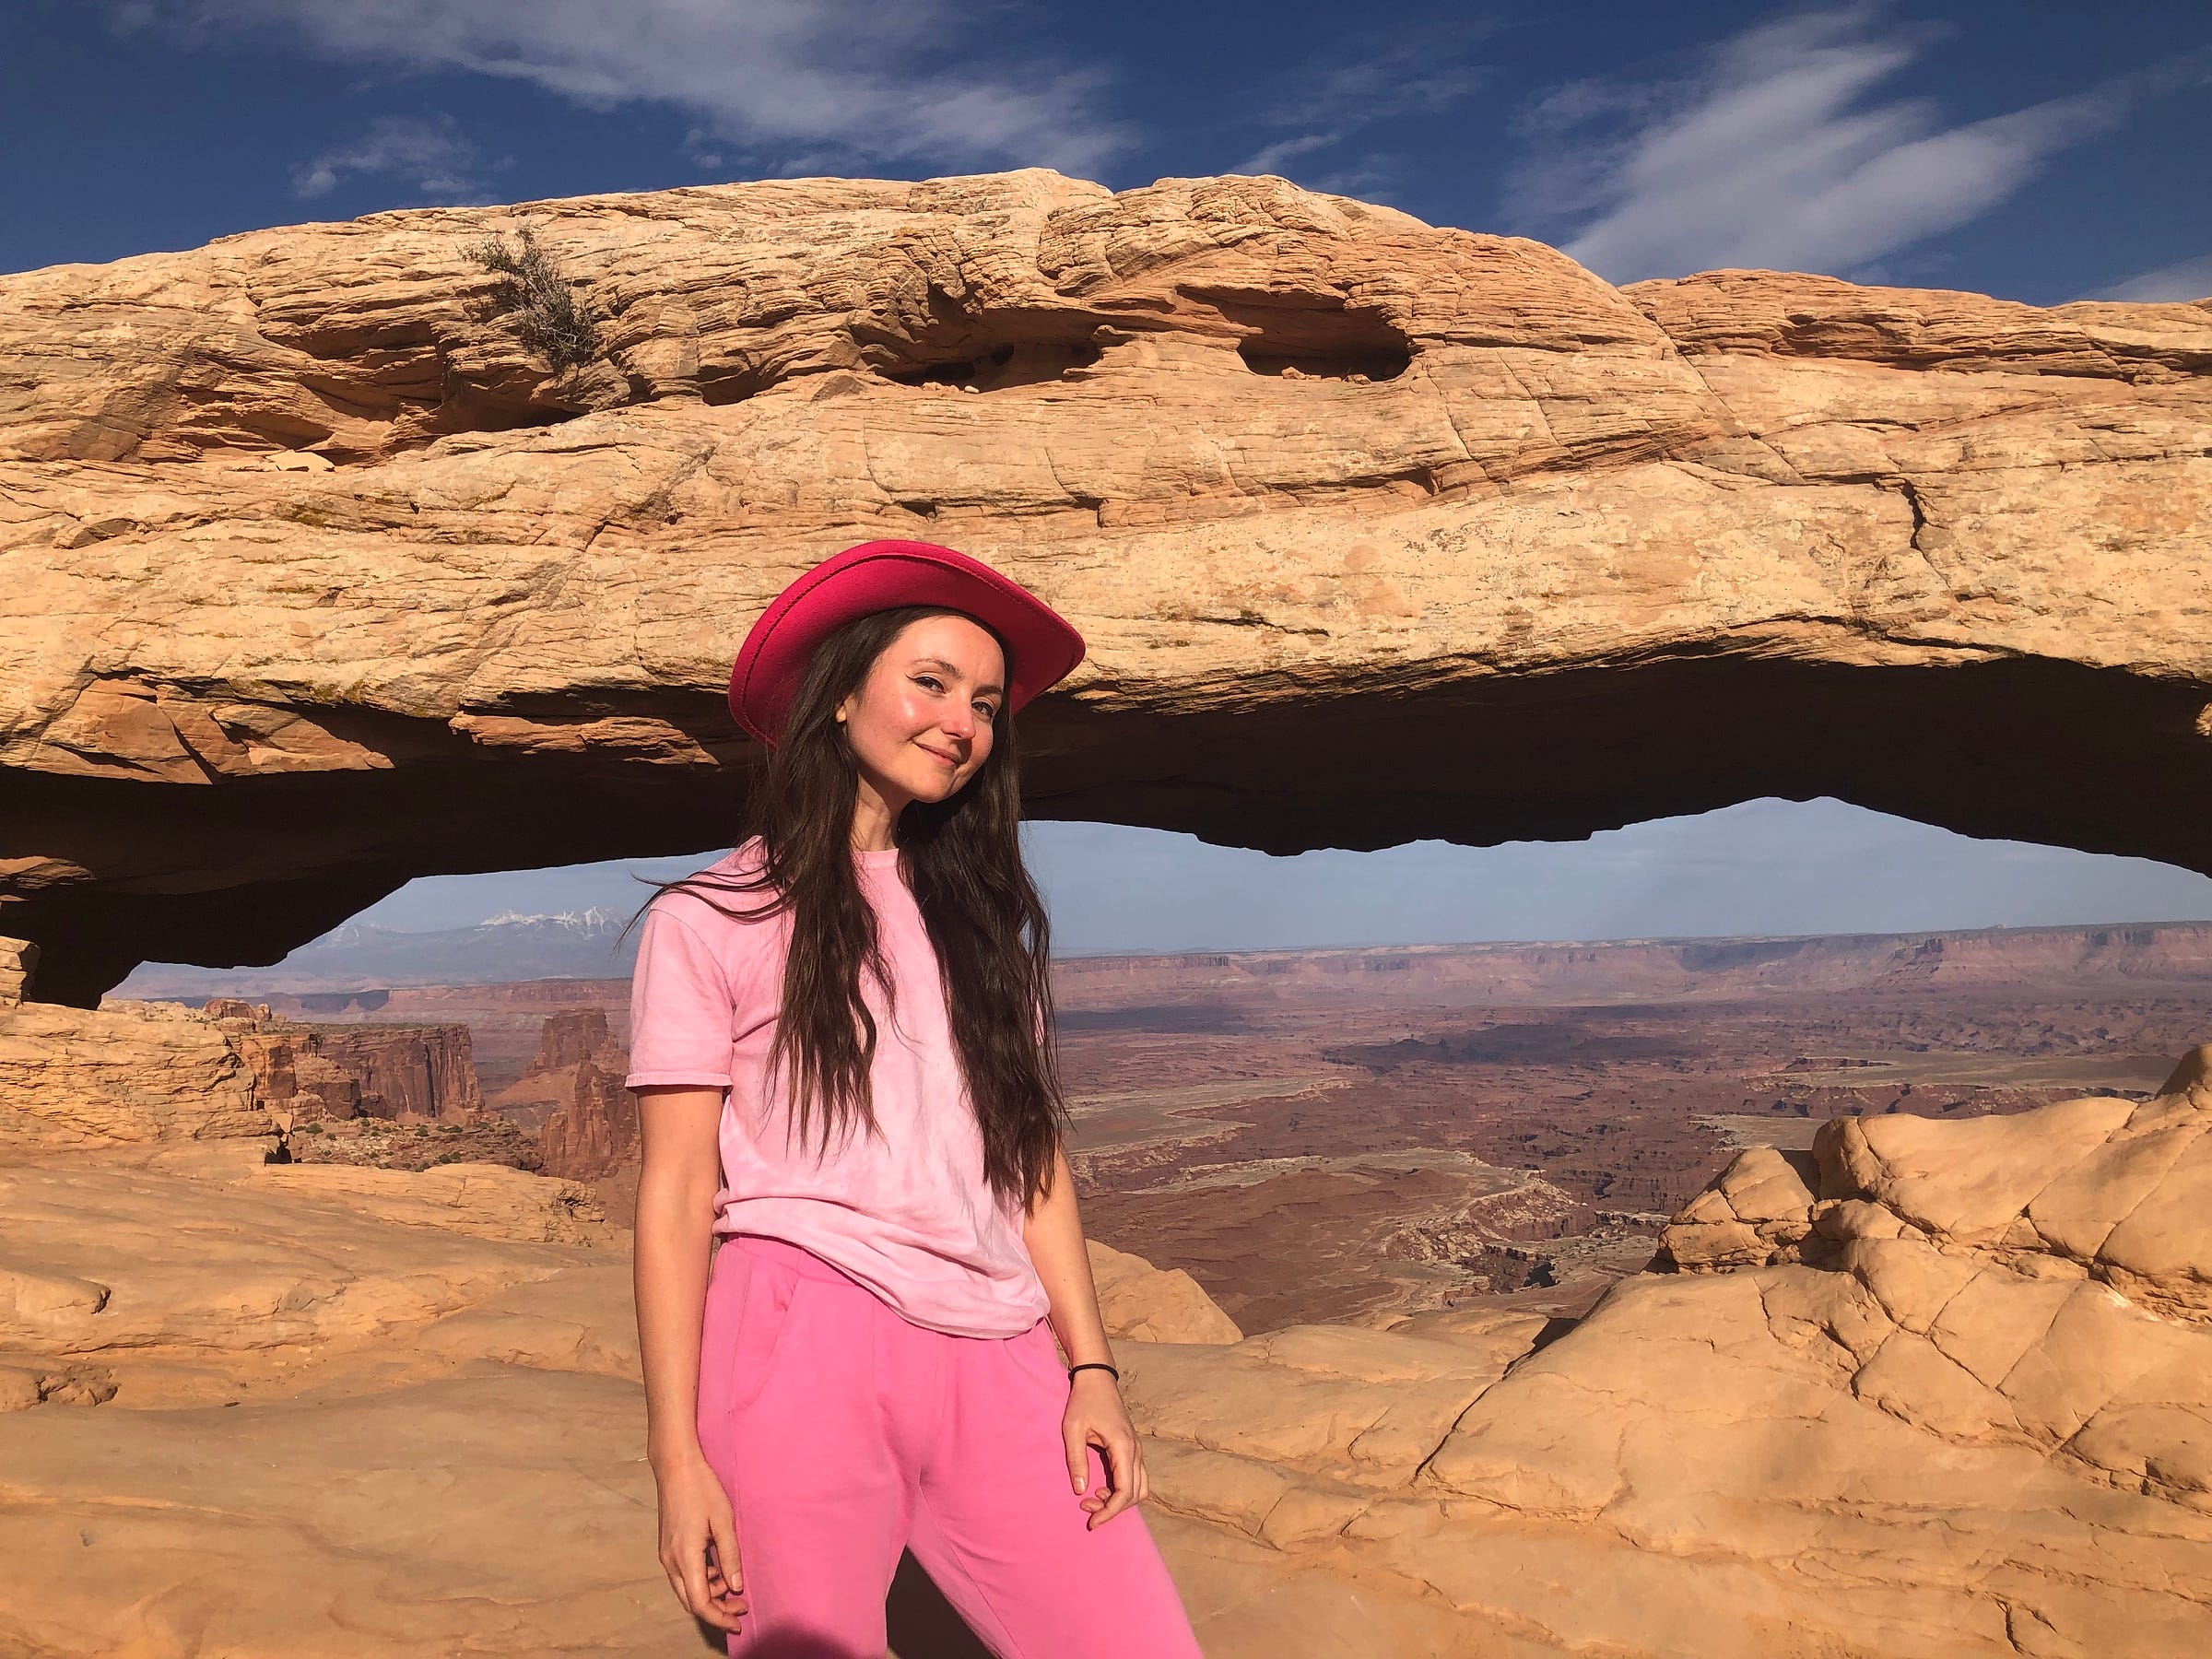 Mary Boo Anderson stands in all pink, including a pink cowboy hat, in front of a large rock structure.